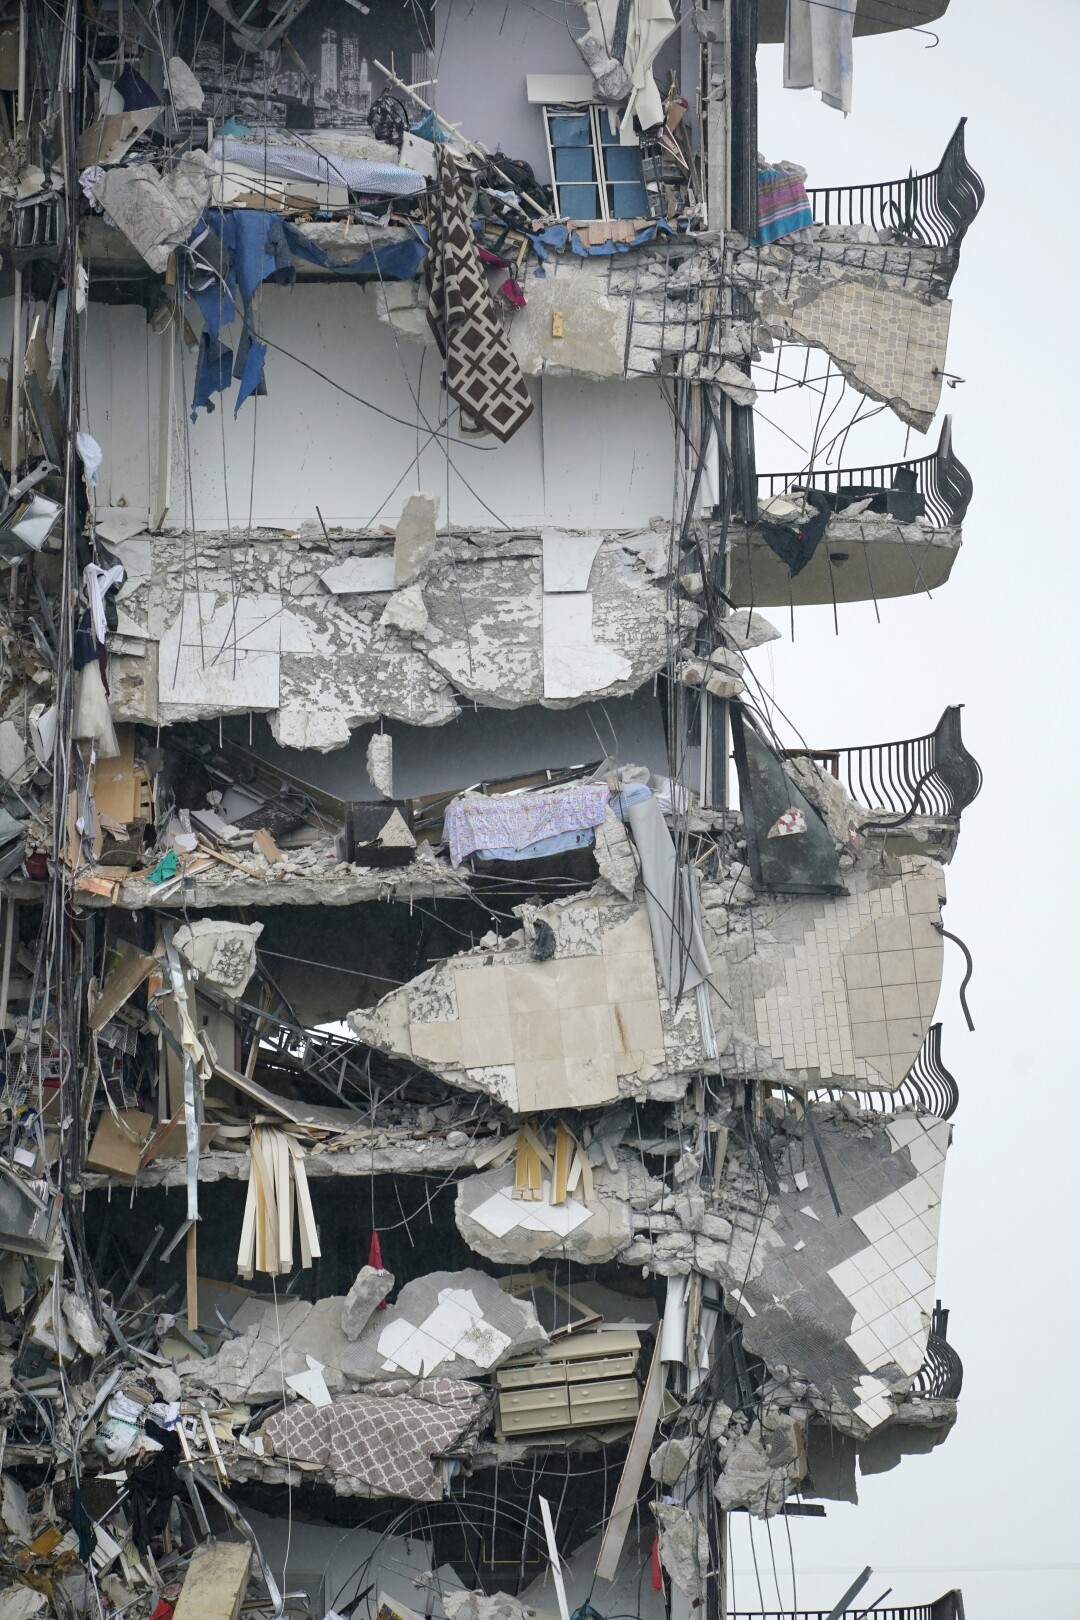 Part of a building is shown after a partial collapse